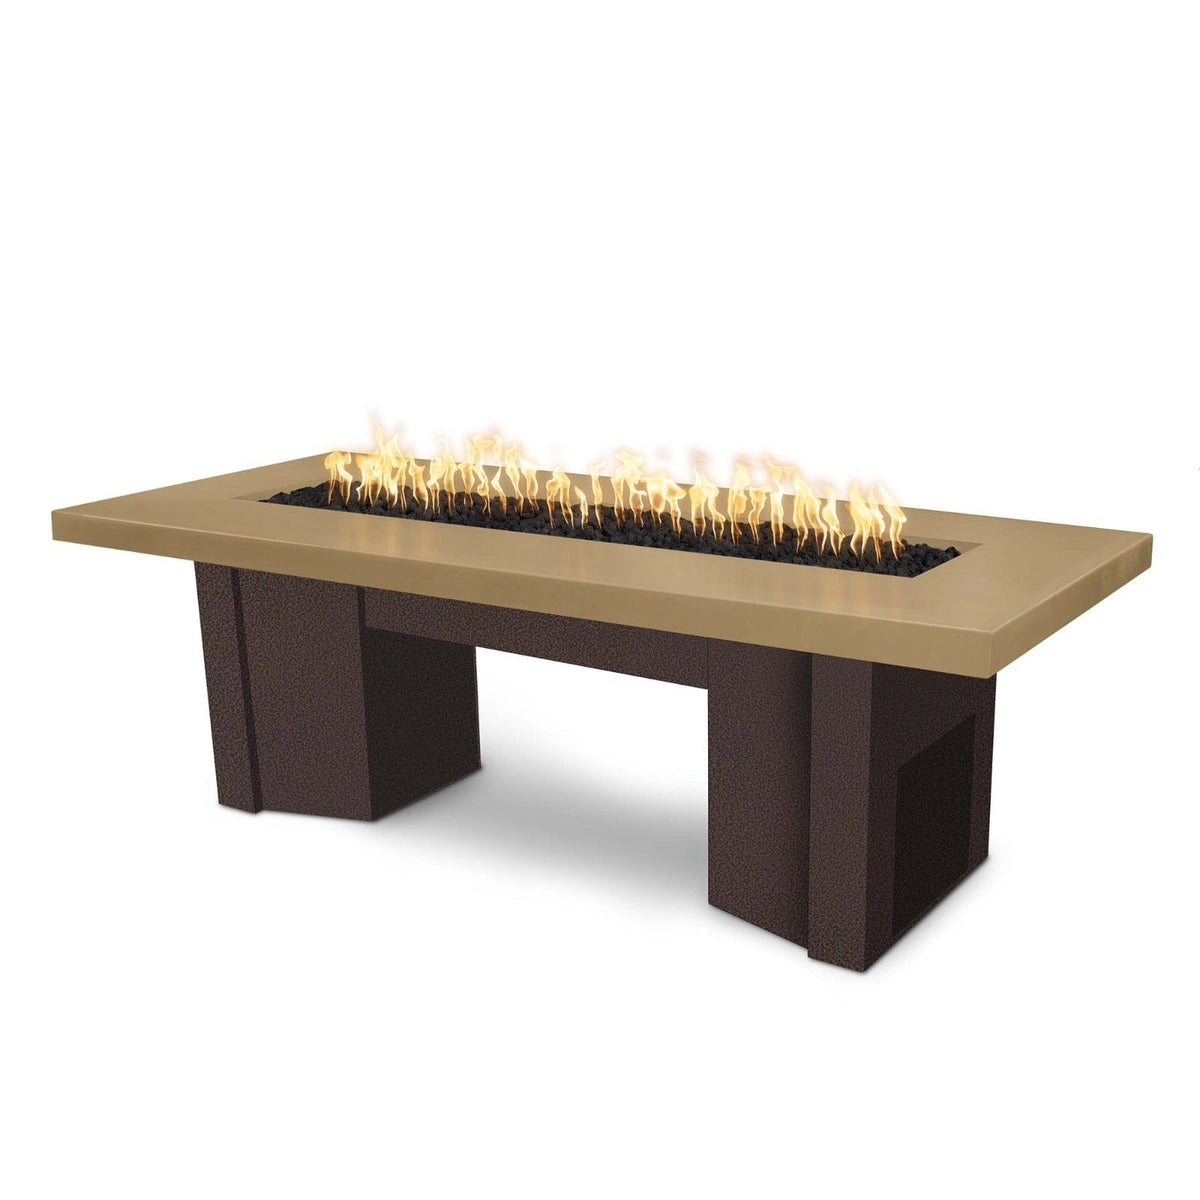 The Outdoor Plus Fire Features Brown (-BRN) / Copper Vein Powder Coated Steel (-CPV) The Outdoor Plus 60&quot; Alameda Fire Table Smooth Concrete in Natural Gas - Flame Sense System with Push Button Spark Igniter / OPT-ALMGFRC60FSEN-NG